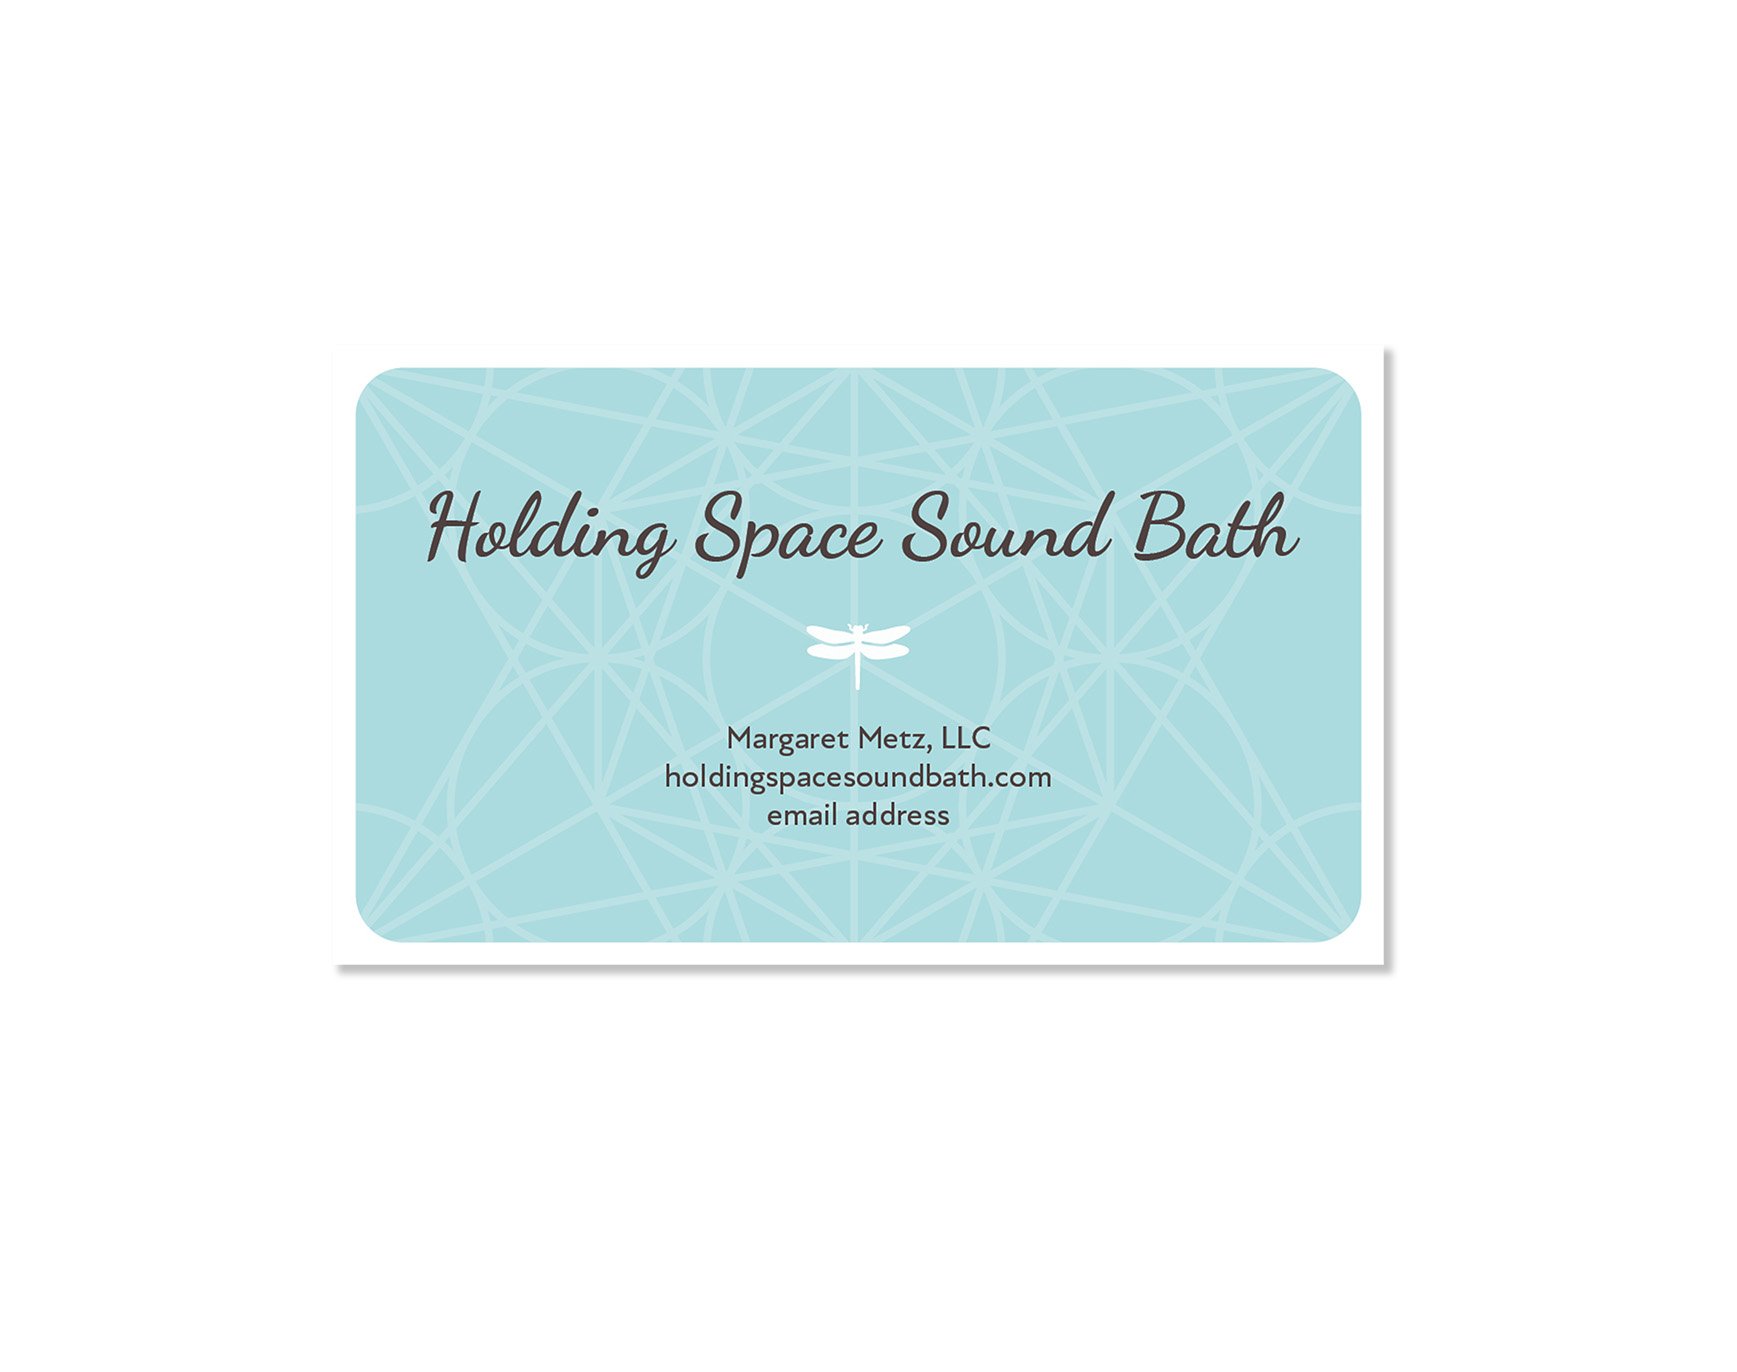 Holding Space Sound Bath business card concept 4